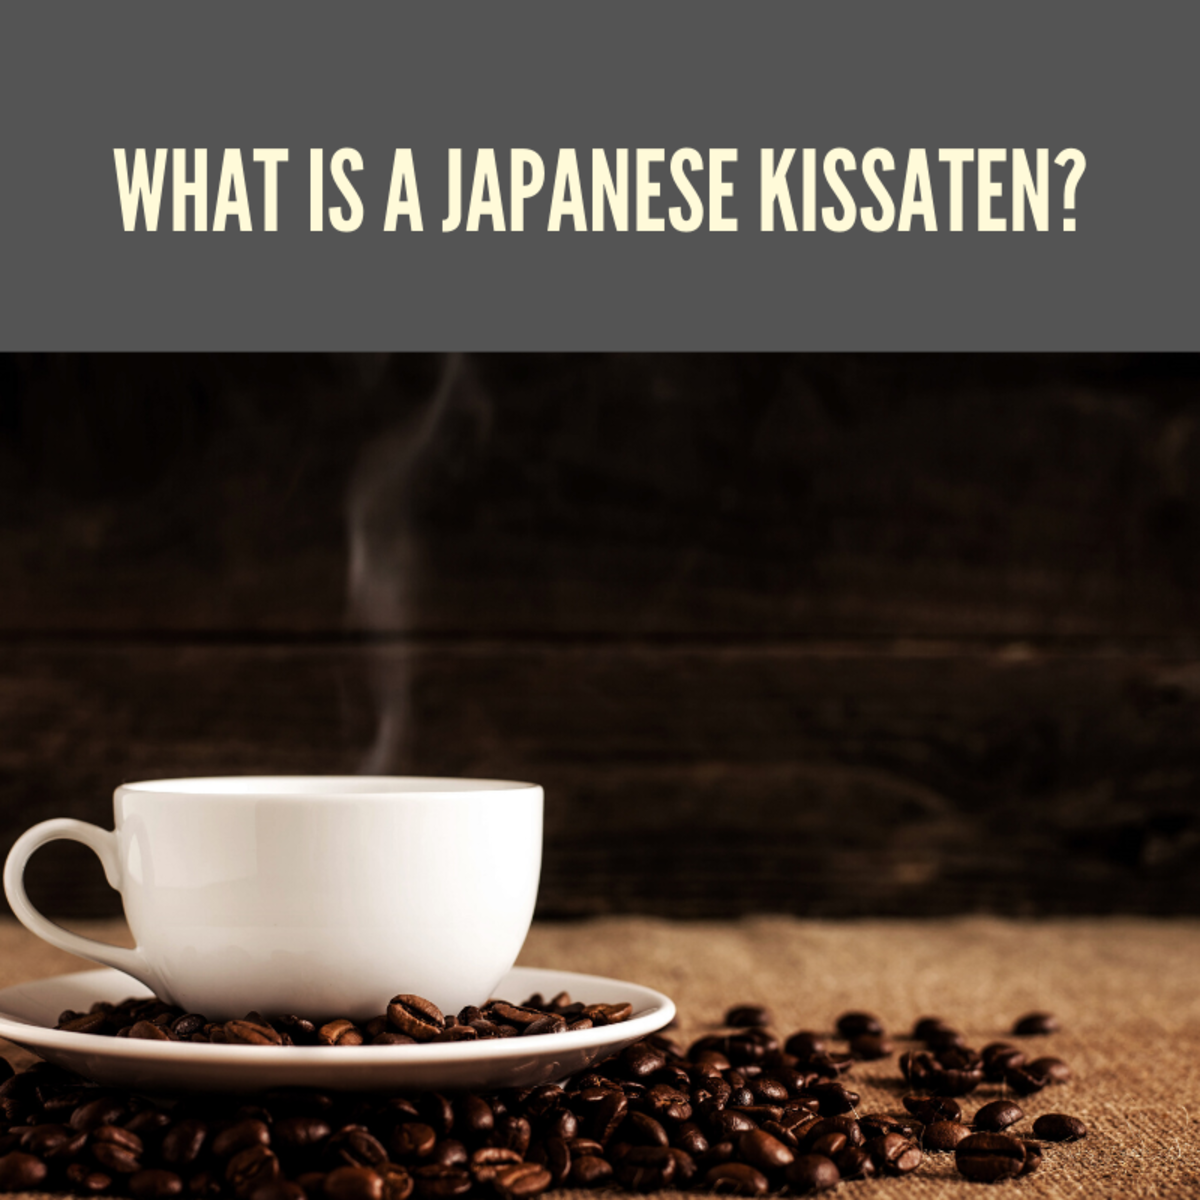 Japan has quite a widespread coffee culture. Read on to find out more about this culture.